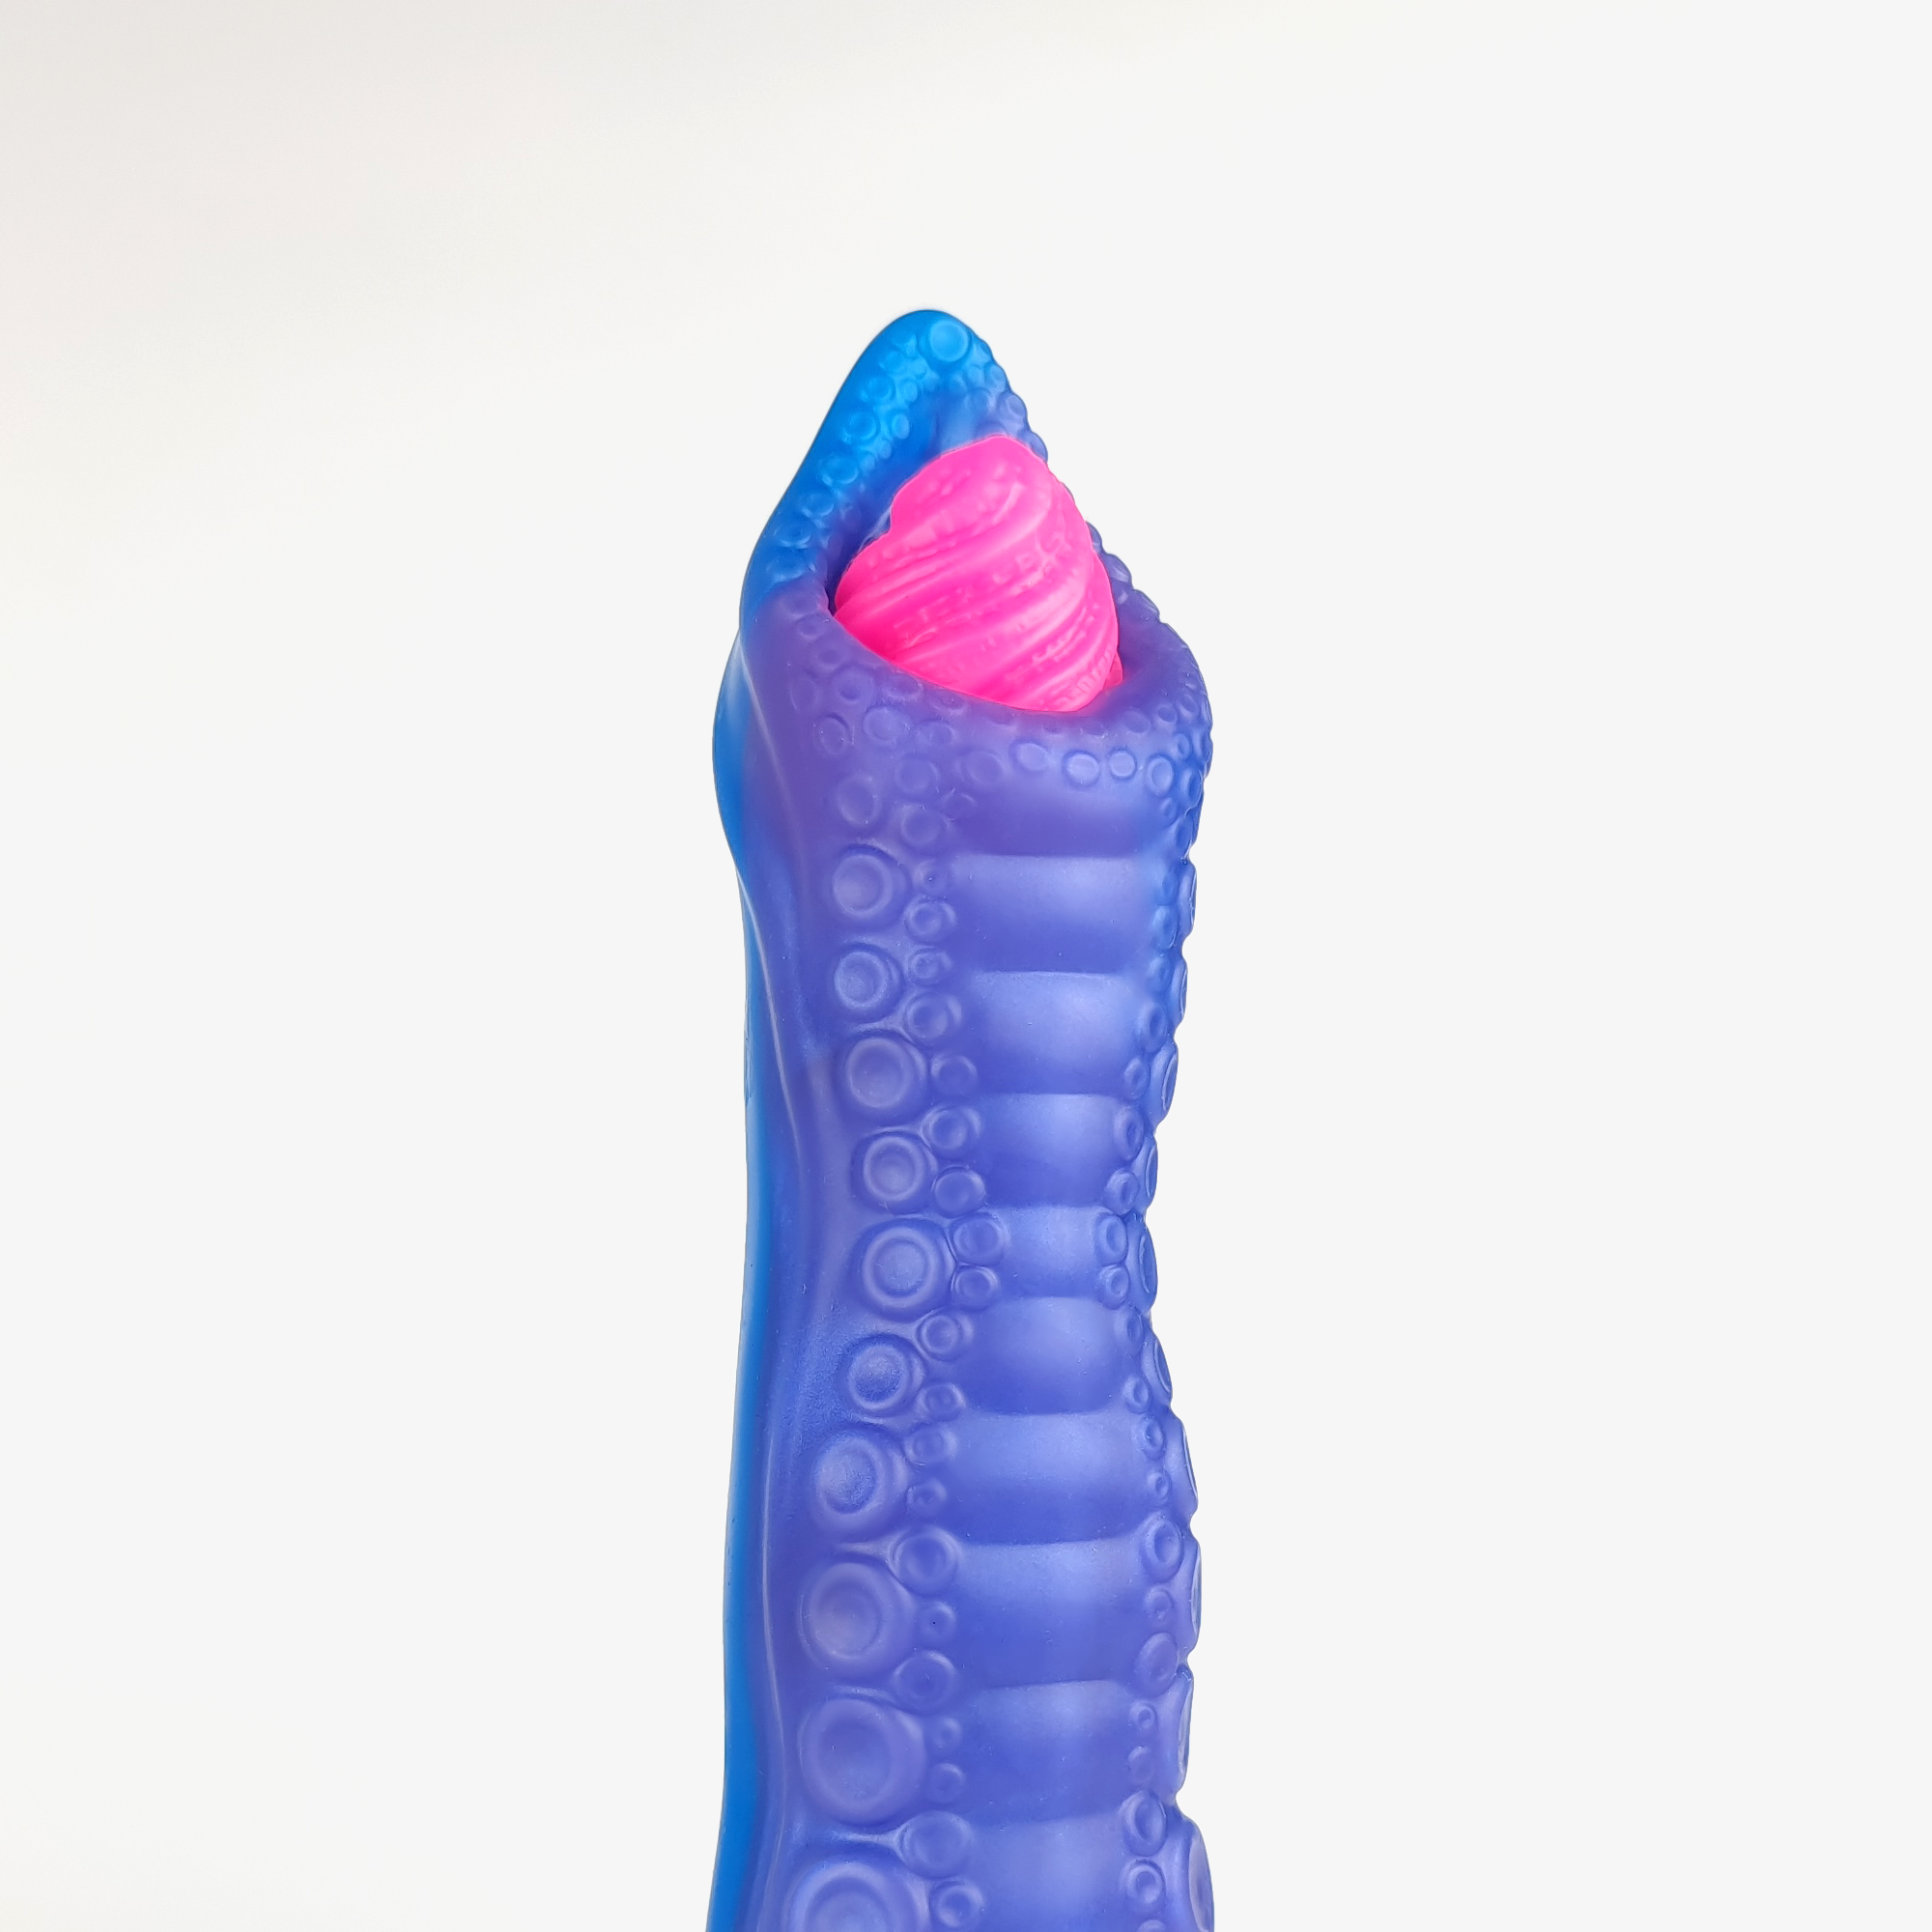 The Tentacle Ovipositor